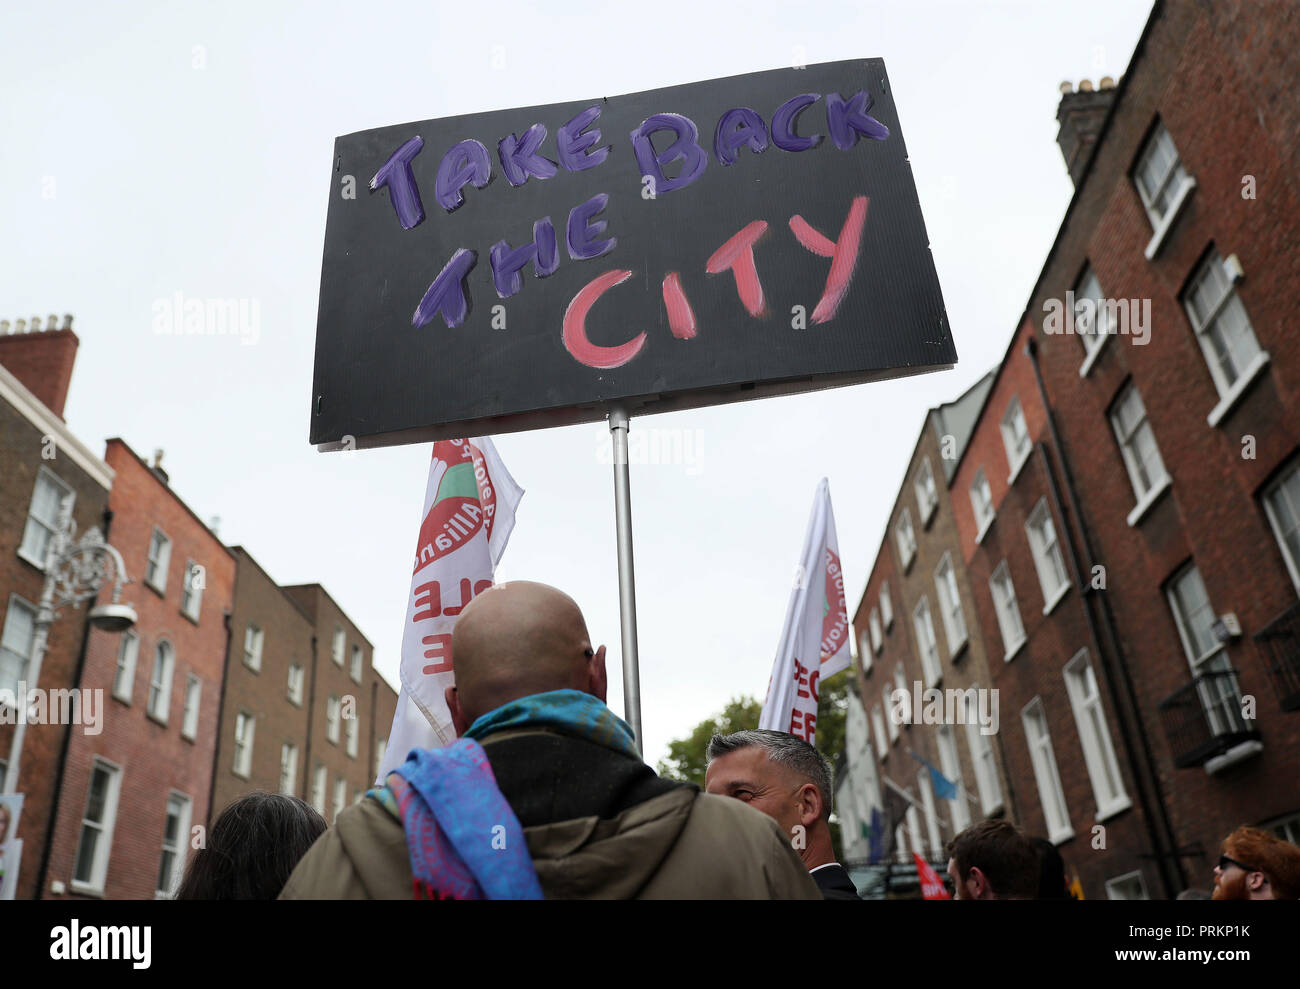 People gather outside Leinster House in Dublin during a Raise the Roof housing rights protest. Stock Photo